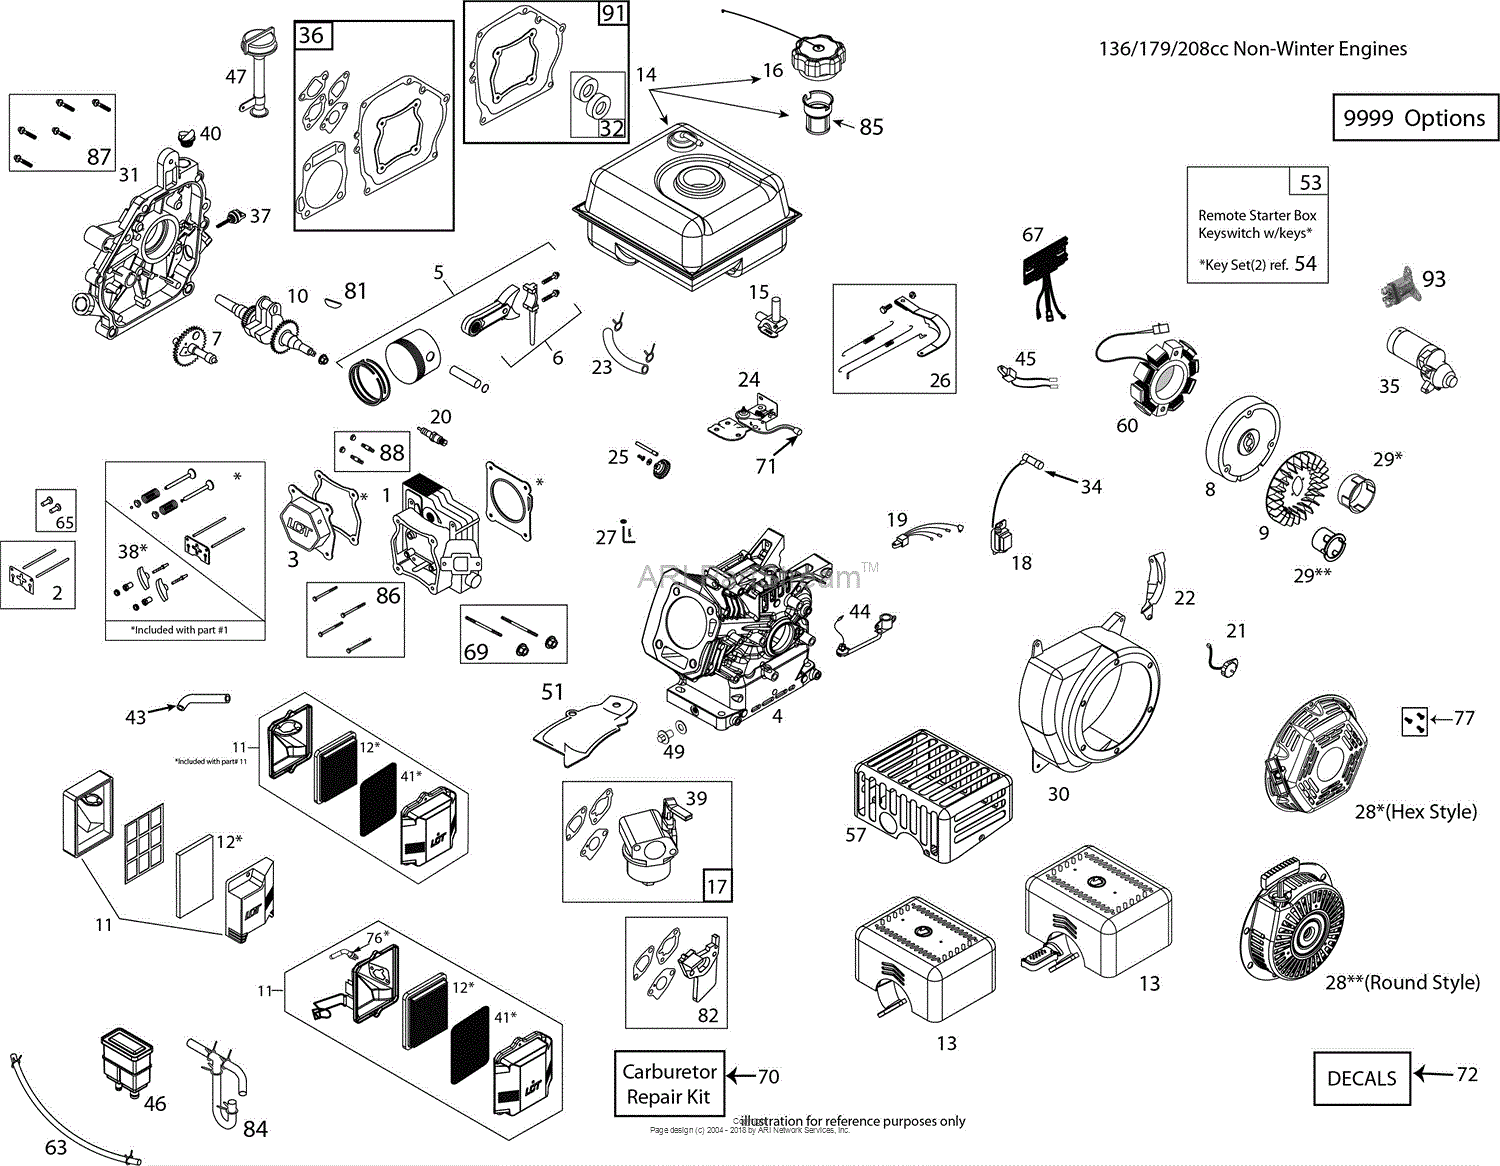 Lct 920810228 Parts Diagram For Parts Assembly